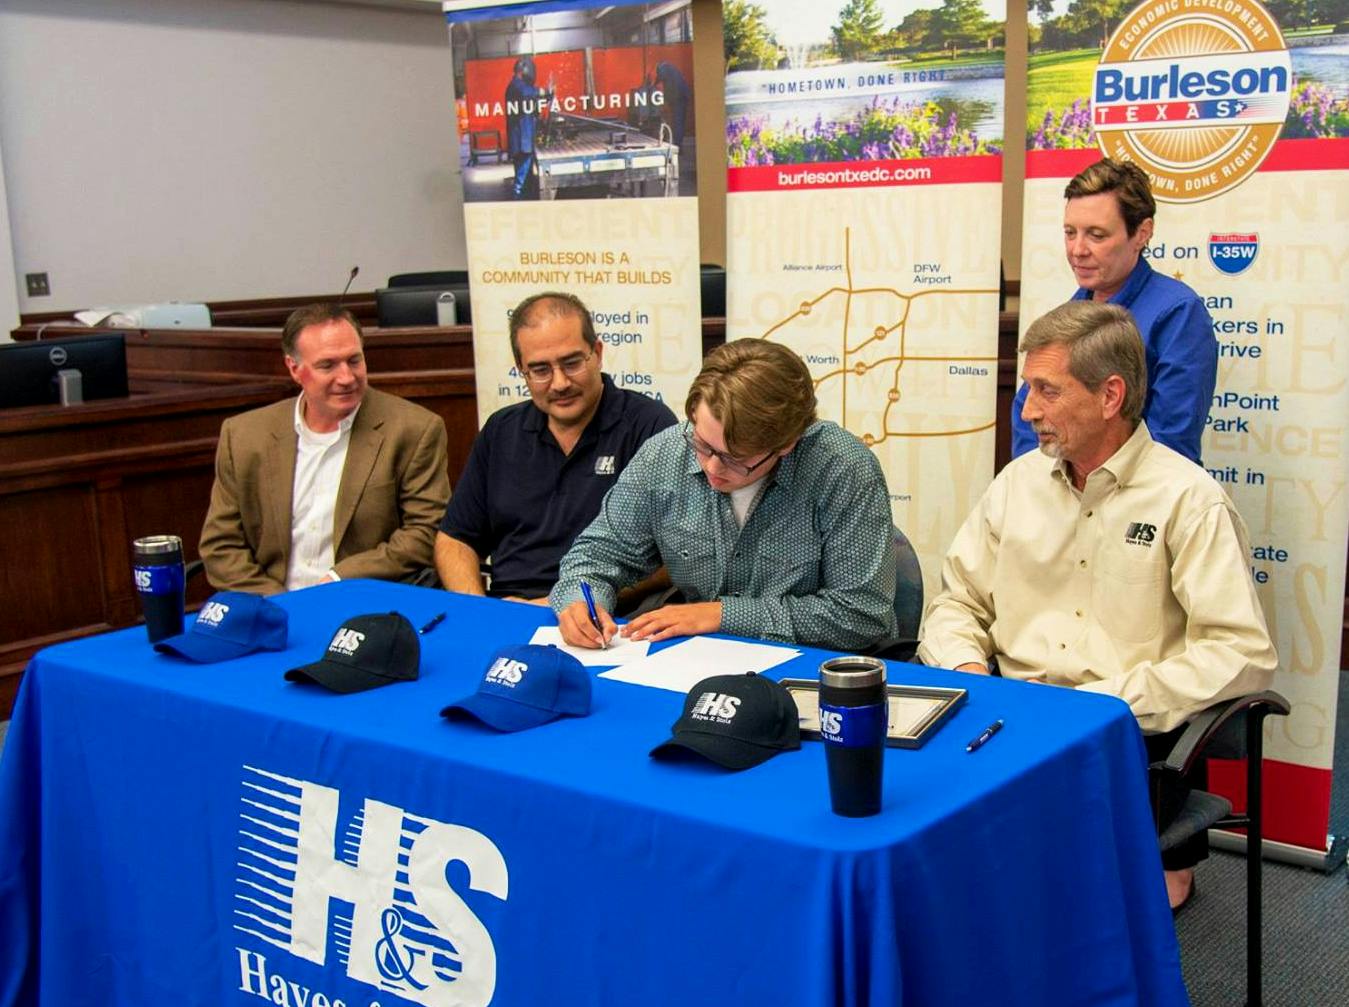 Burleson, Texas, Responds to Skills Gap With Signing Day Event